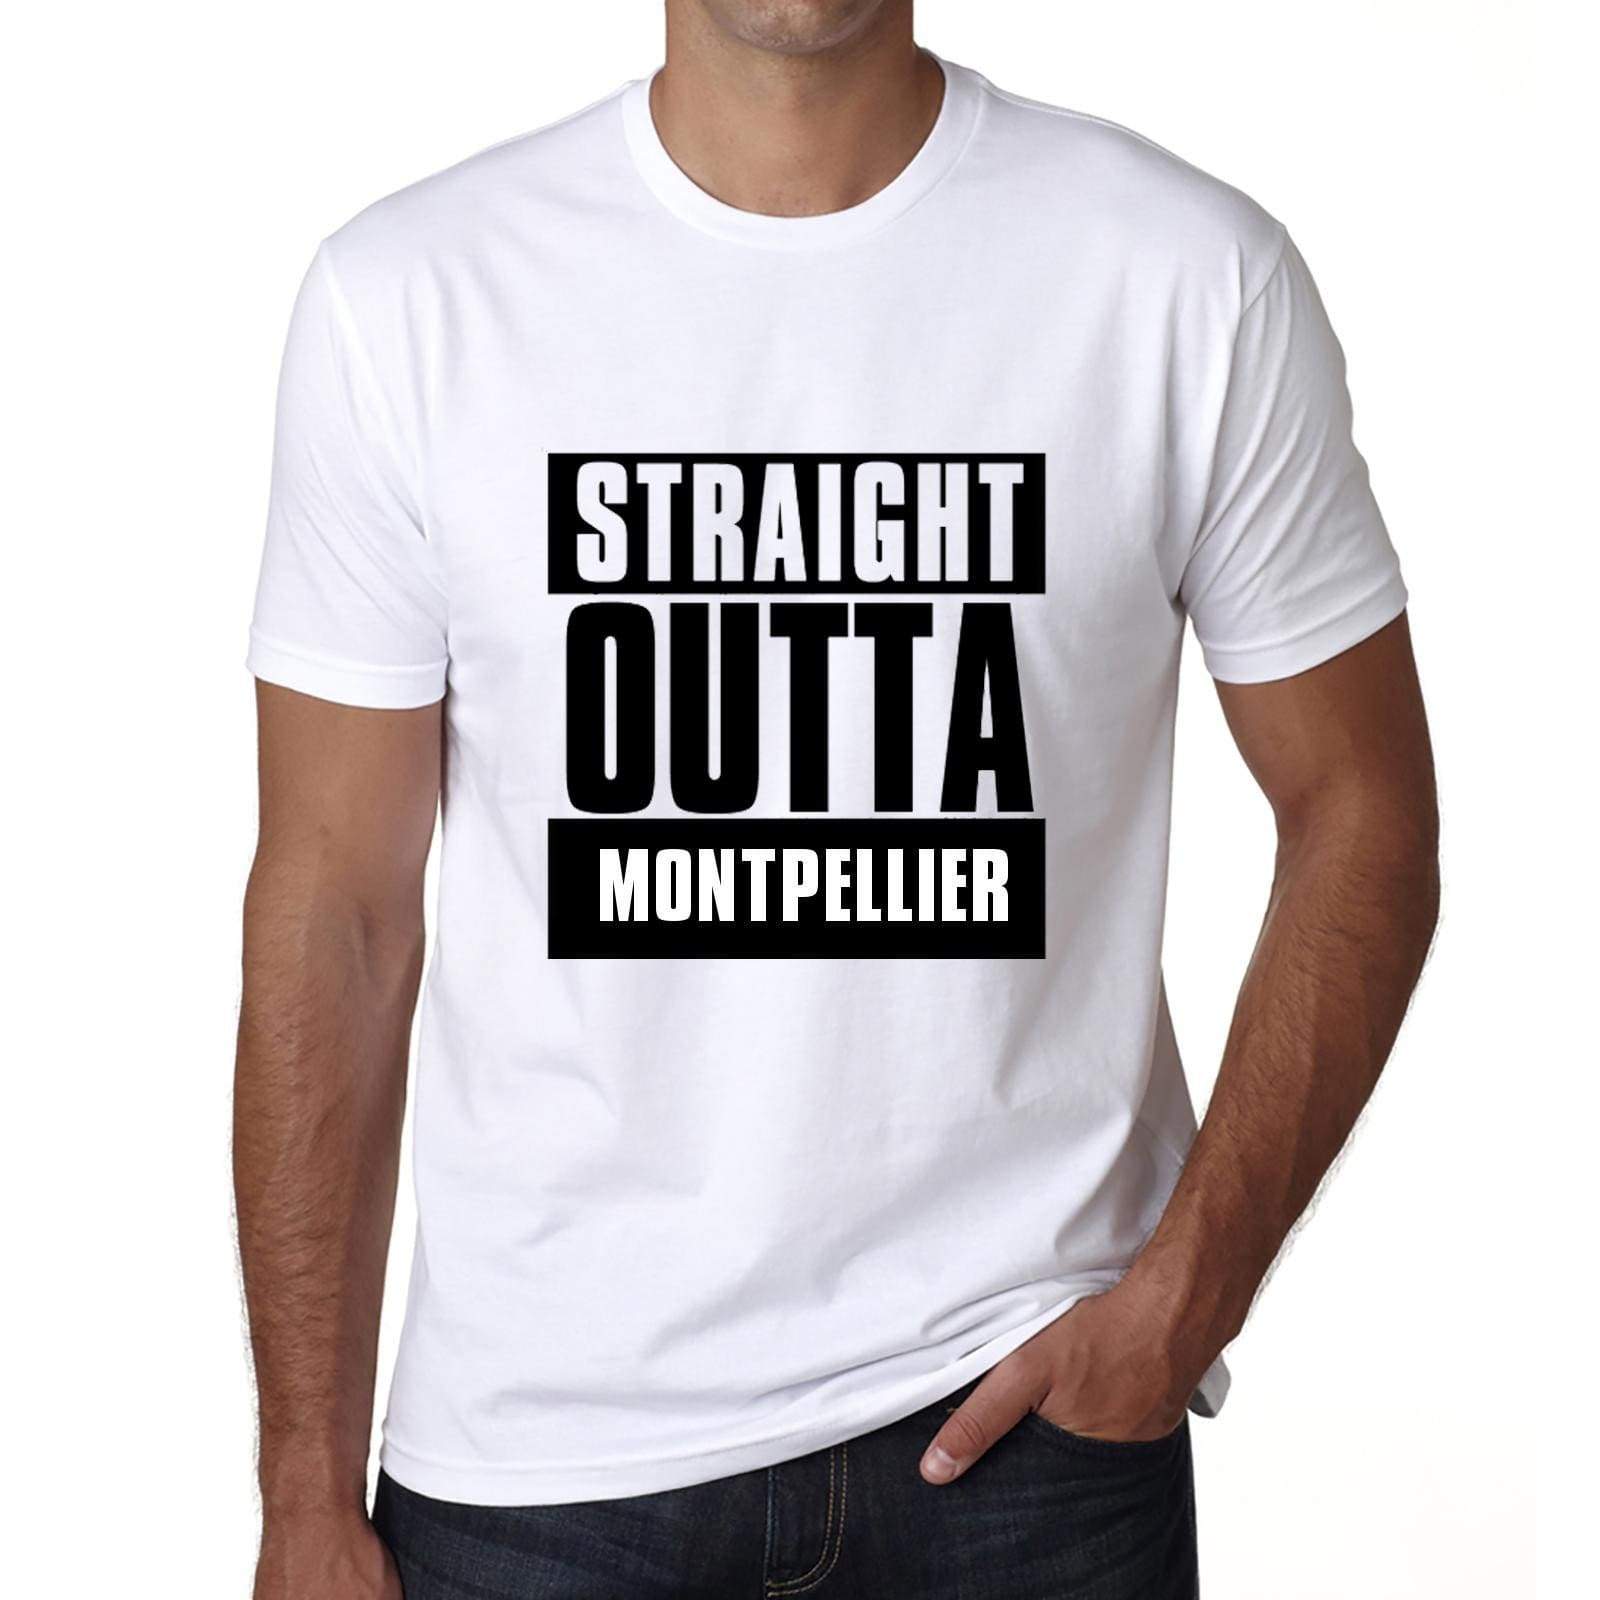 Straight Outta Montpellier Mens Short Sleeve Round Neck T-Shirt 00027 - White / S - Casual